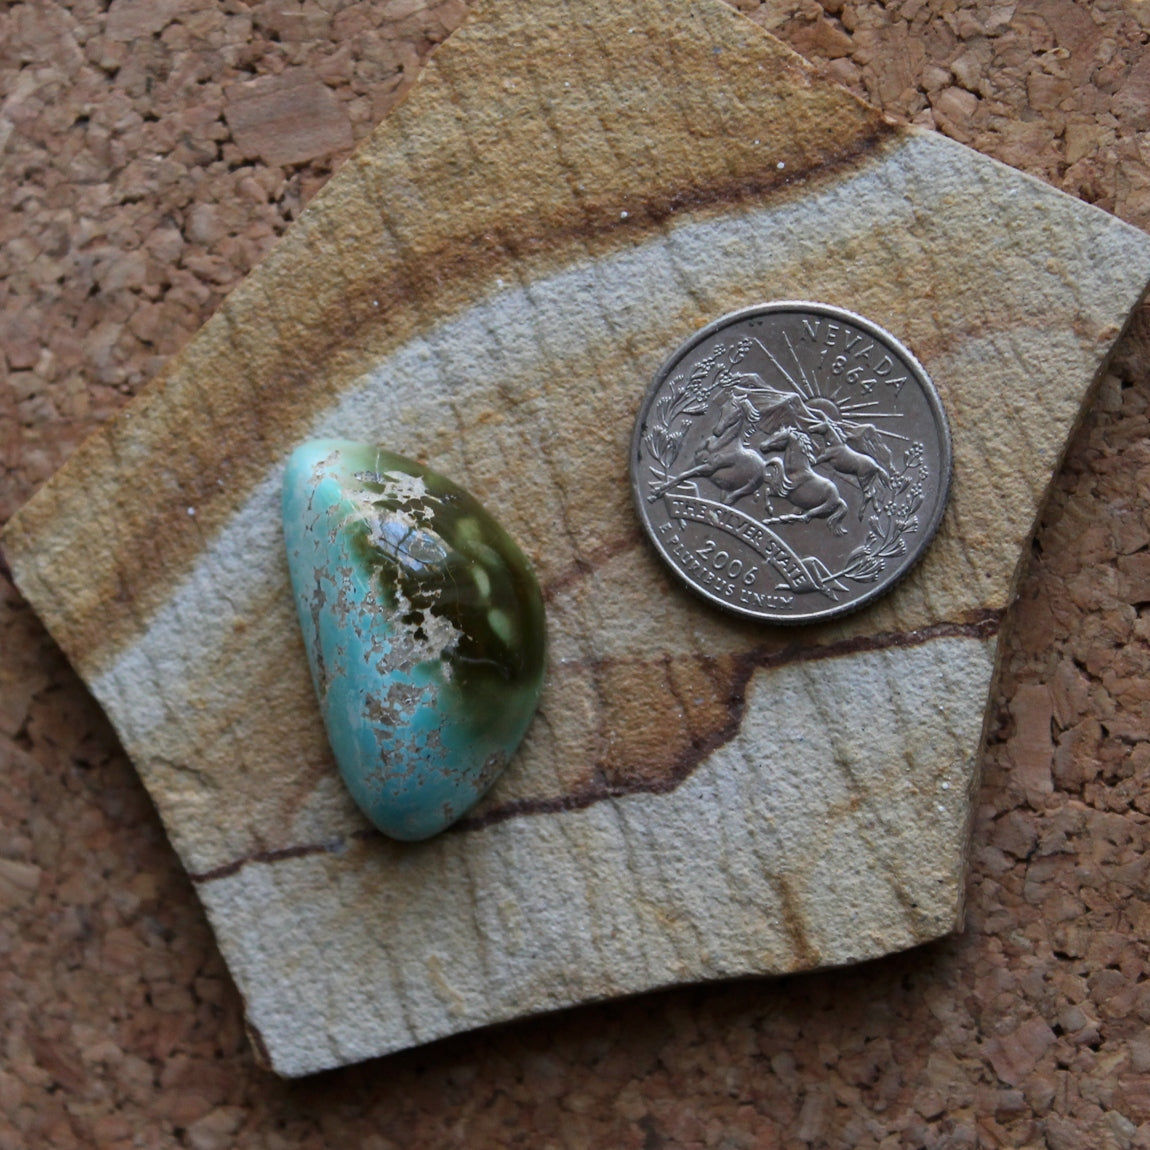 37 carat color change Stone Mountain Turquoise cabochon with a high dome